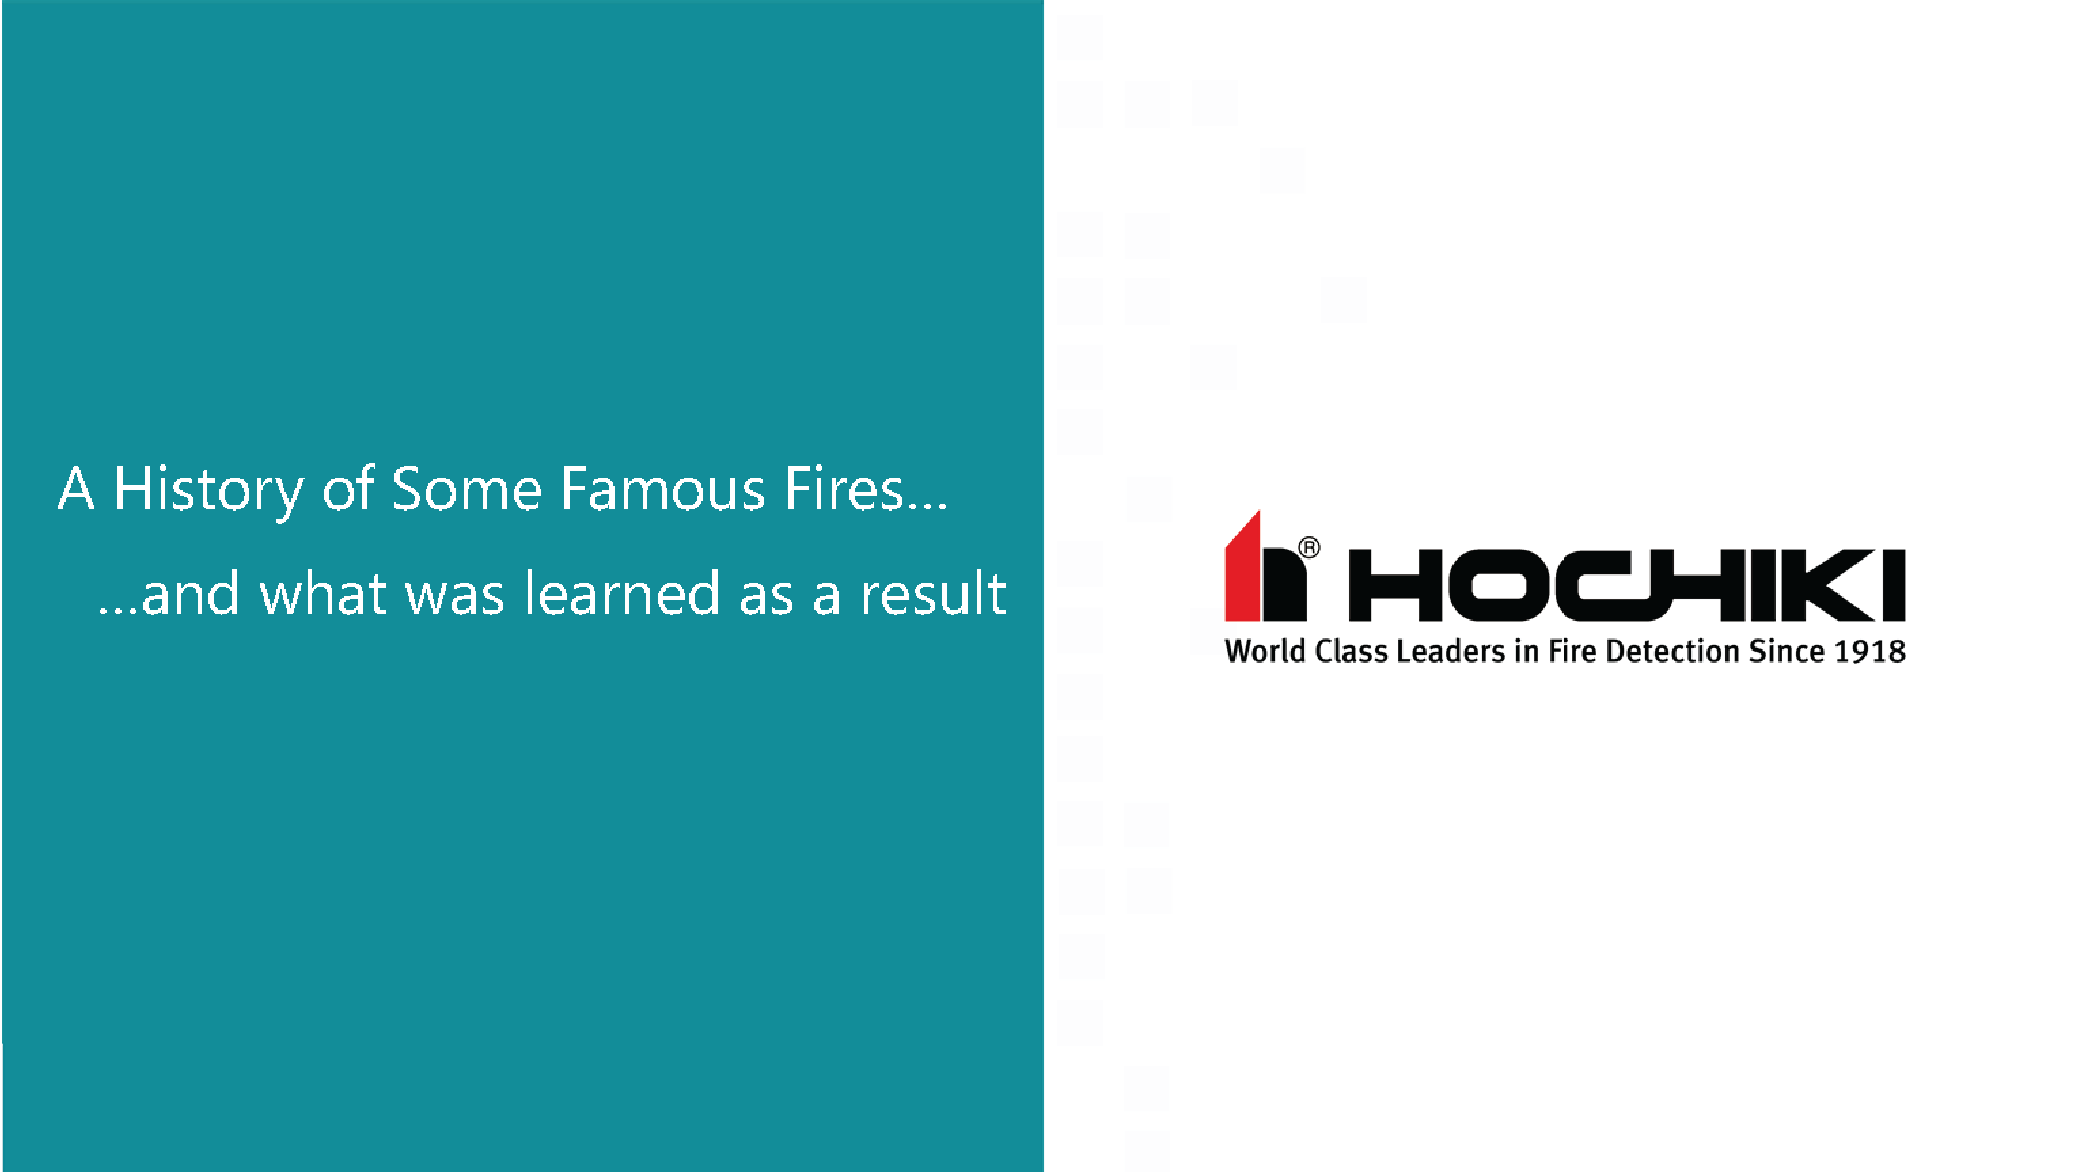 Brief History of Famous Fires & Code Developments